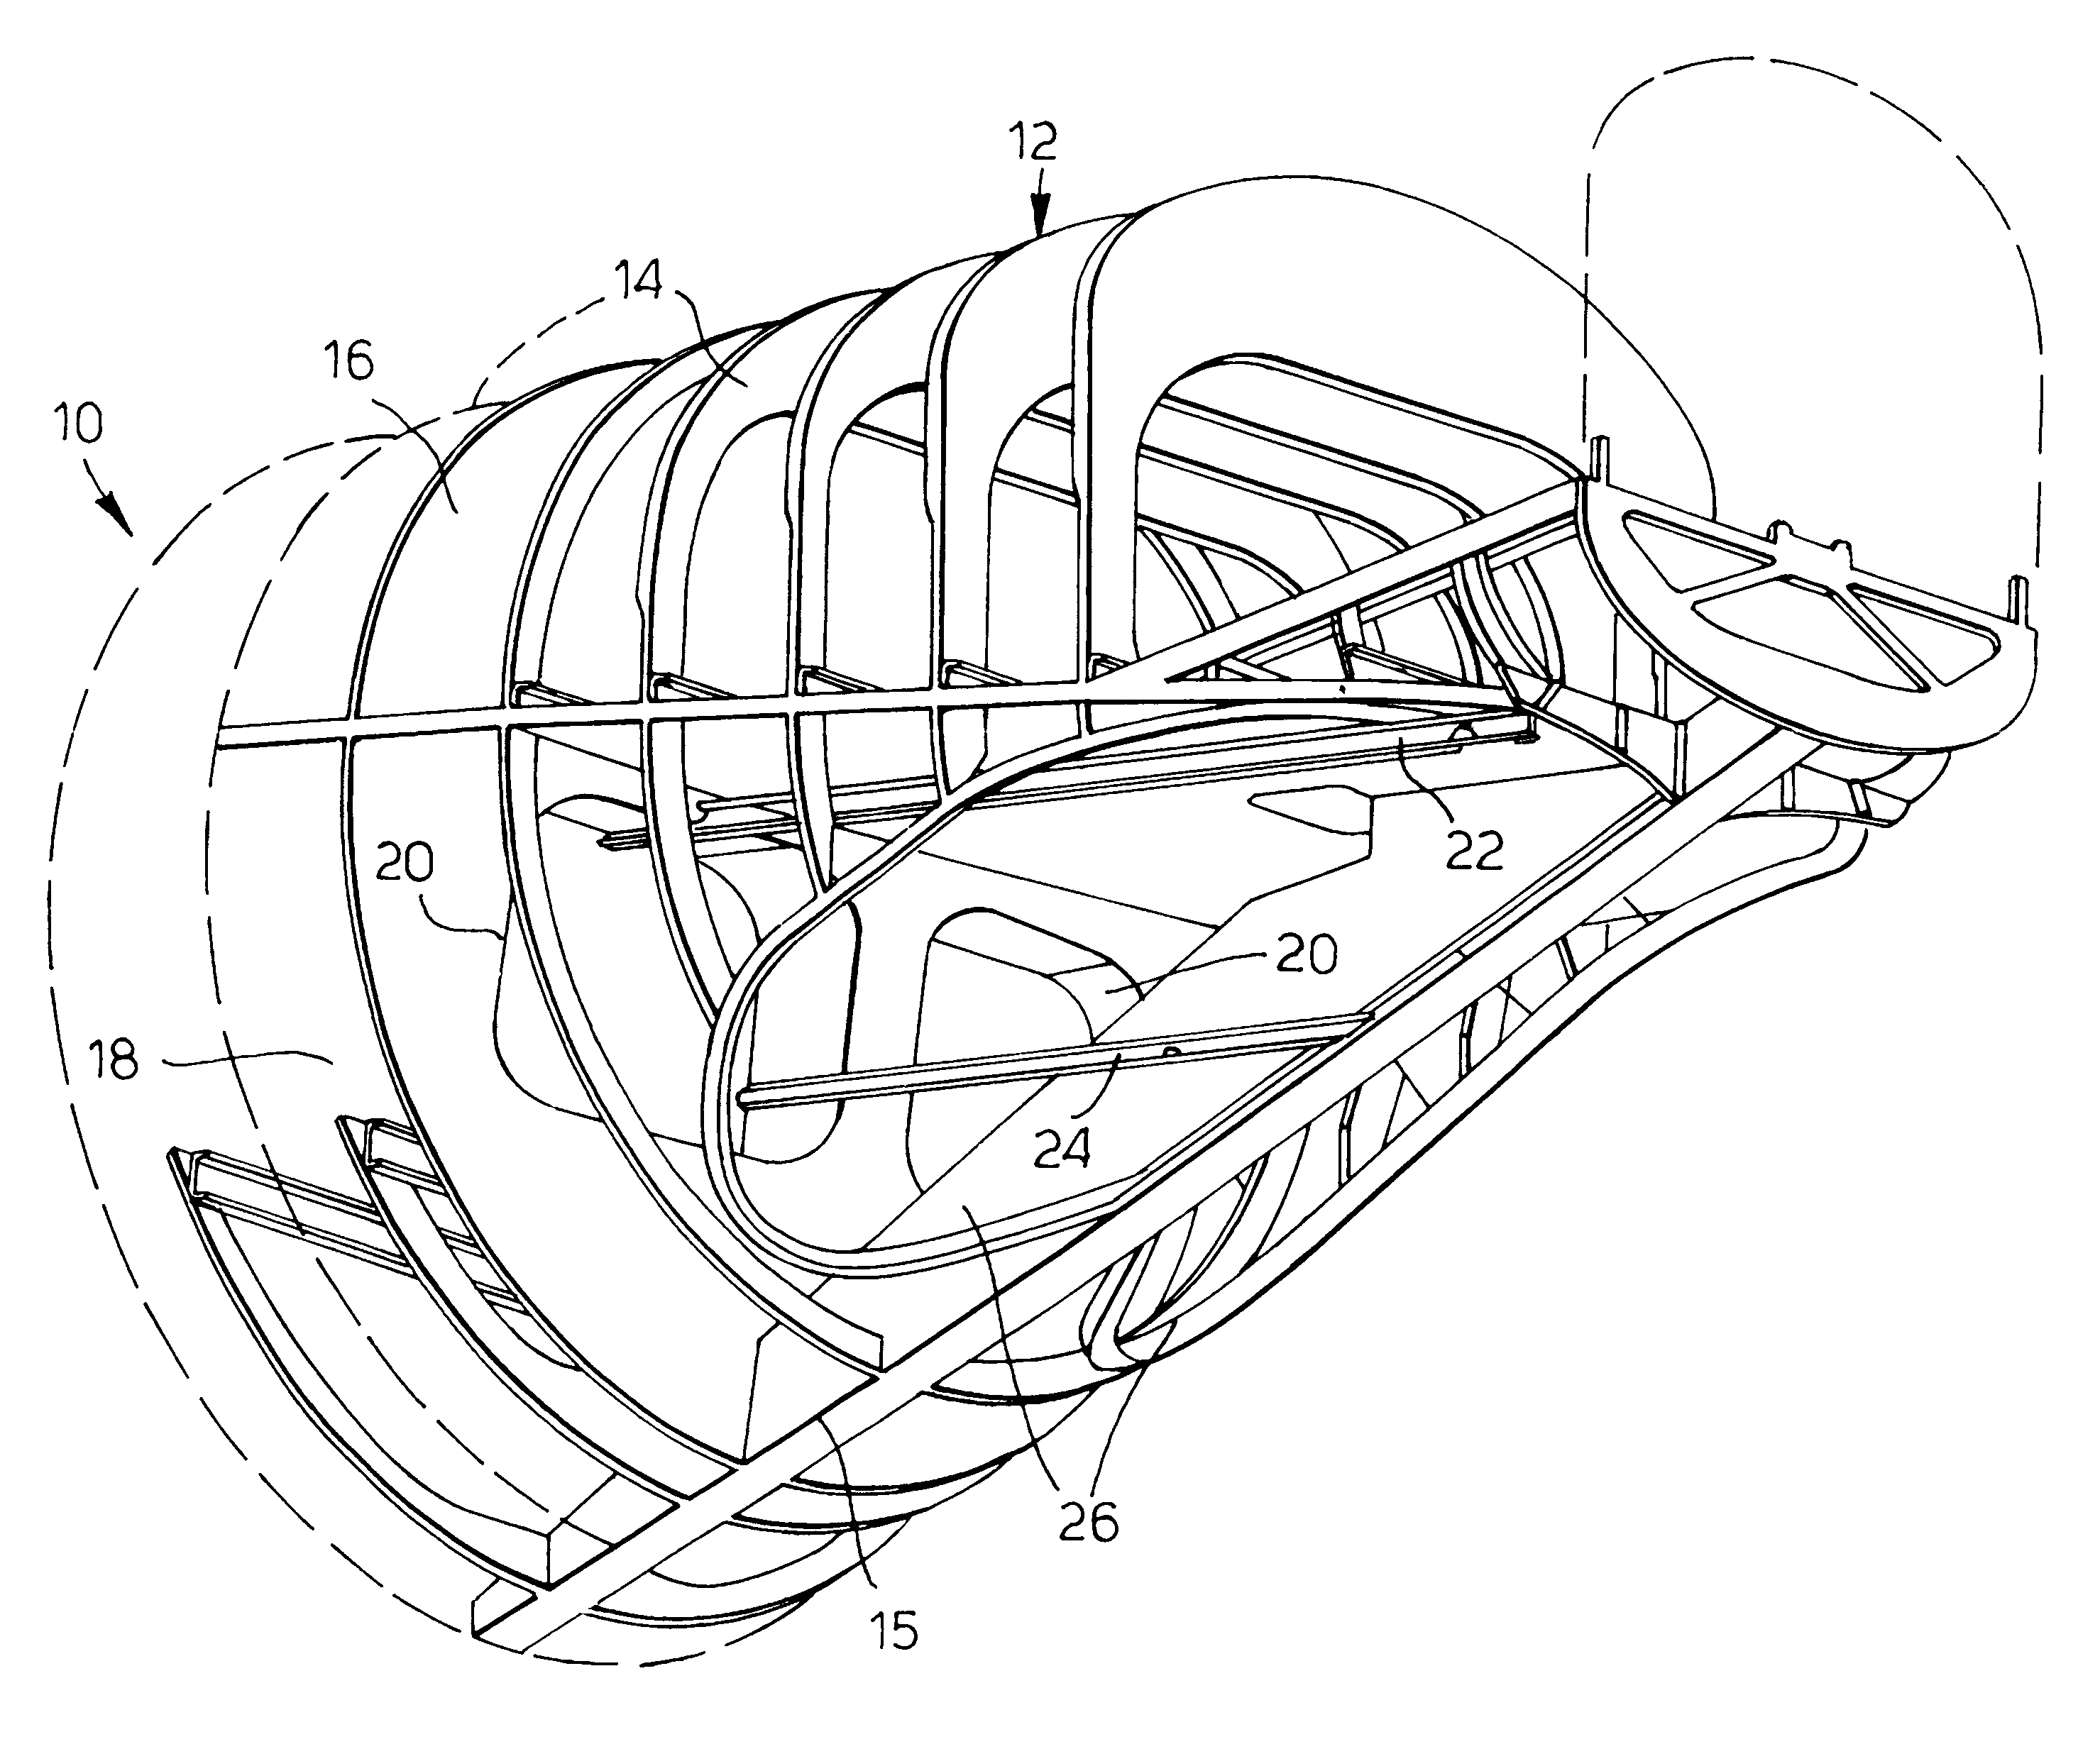 Aircraft fuselage having a rear-end opening for cargo dispatch